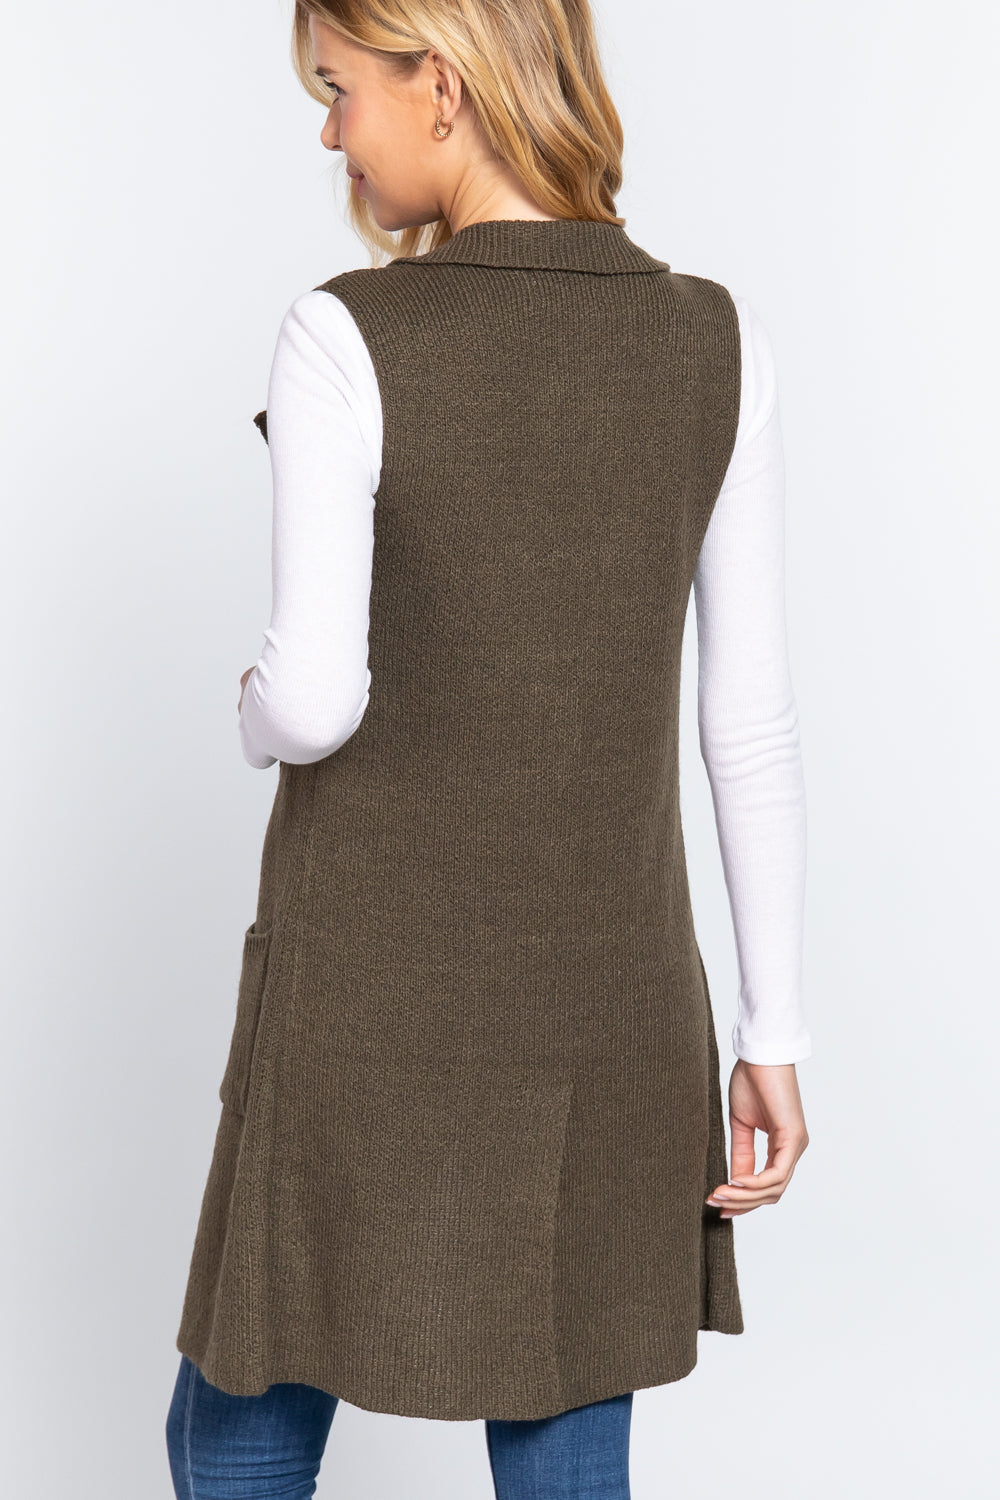 - Sleeveless Long Sweater Vest -10 colors - womens vest at TFC&H Co.